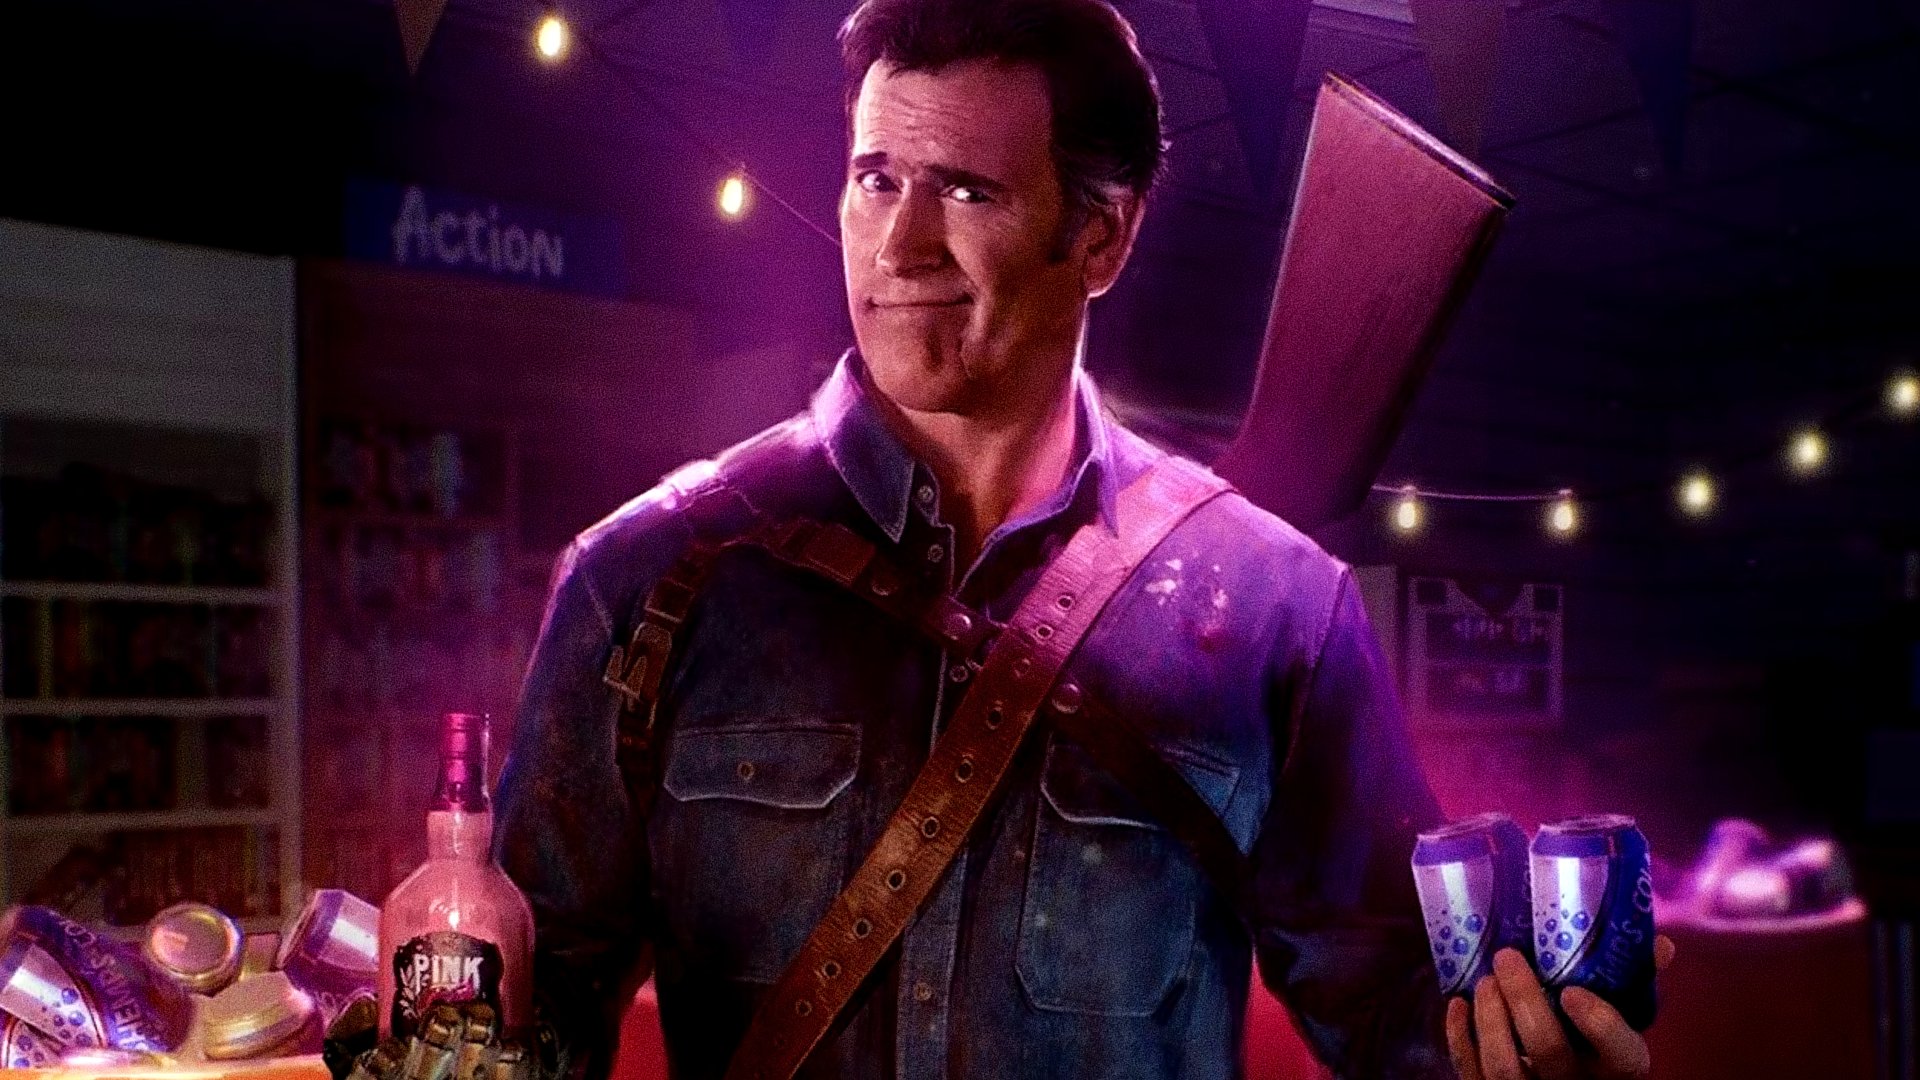 Evil Dead: The Game - GOTY Edition